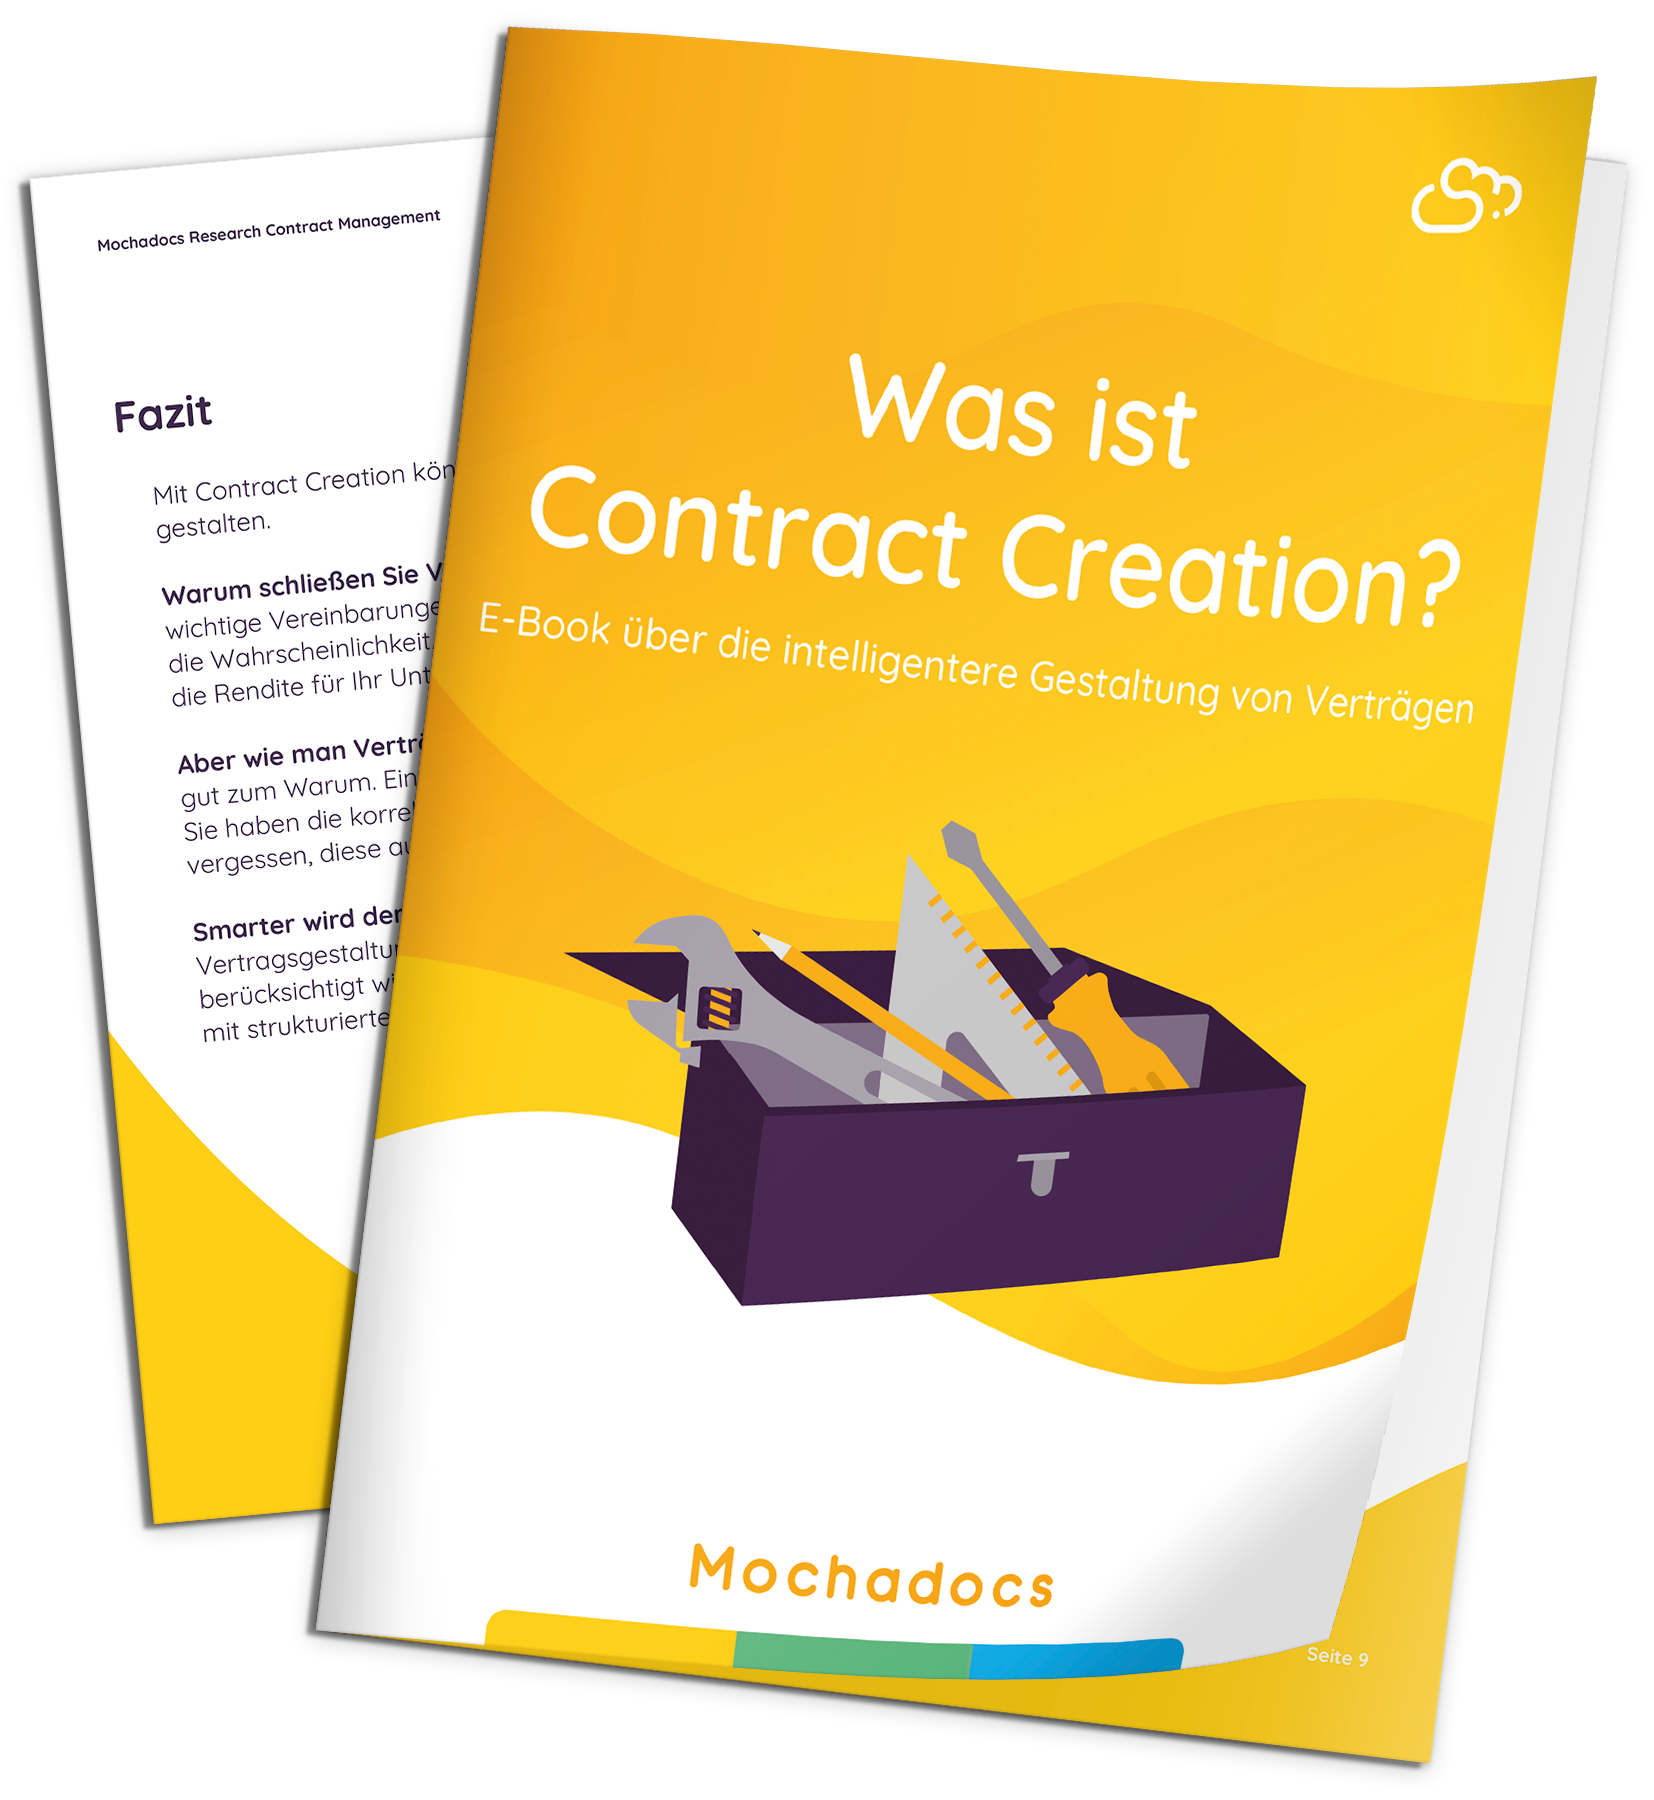 Mochadocs - Contract Creation - Was ist Contract Creation?